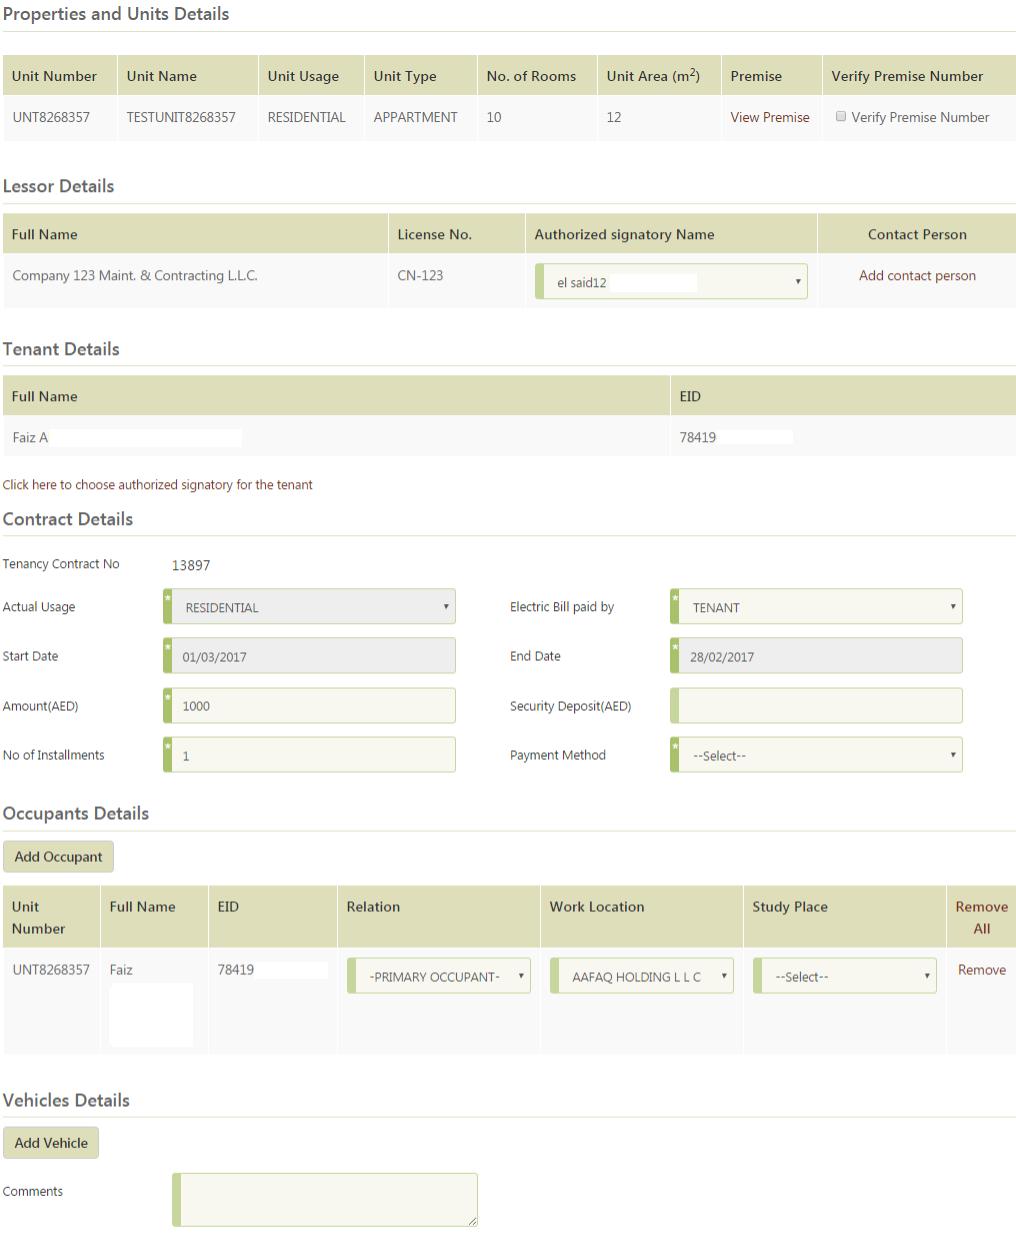 1. Search for Tenancy Contract Search for Tenancy Contract by type in contract number and click button 'Search'.